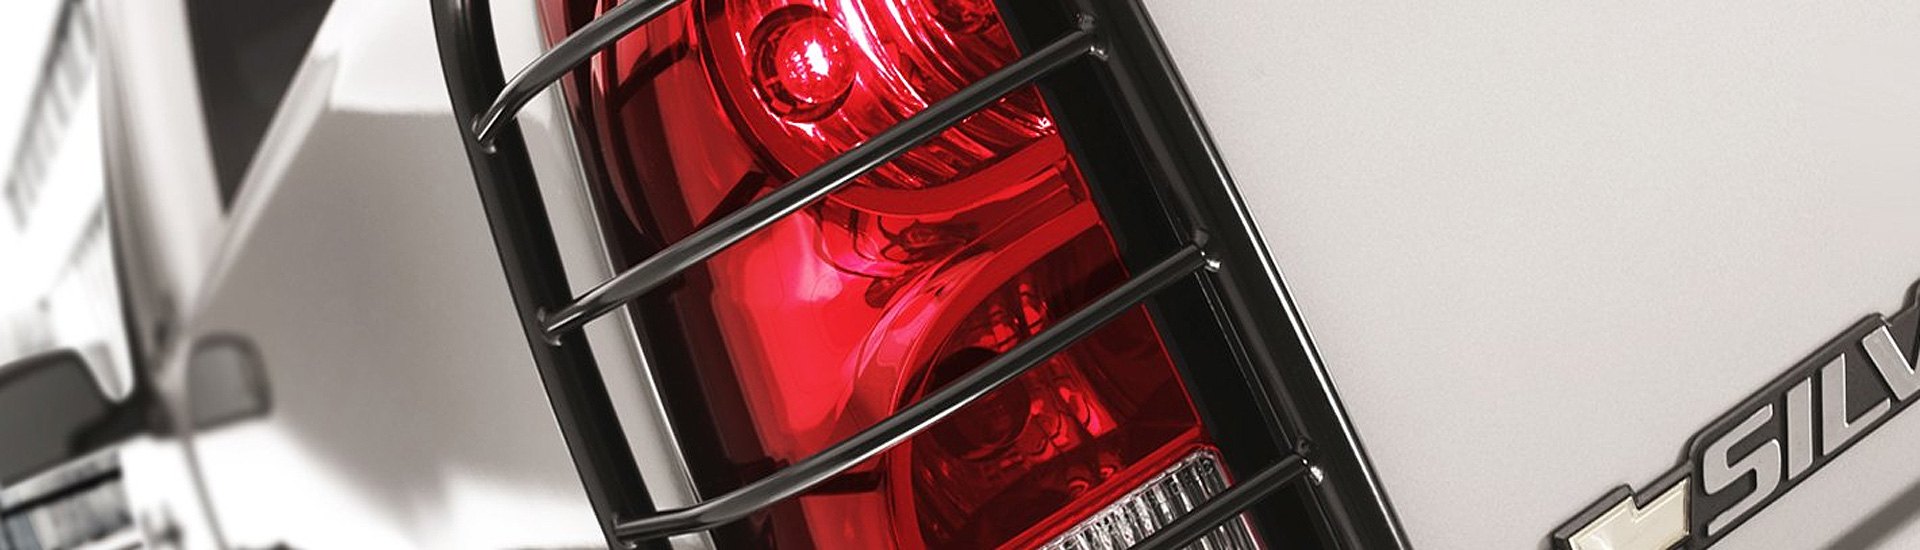 Spec-D Tuning TLT-WRG07BKV2-OW Tail Light Guard Covers 